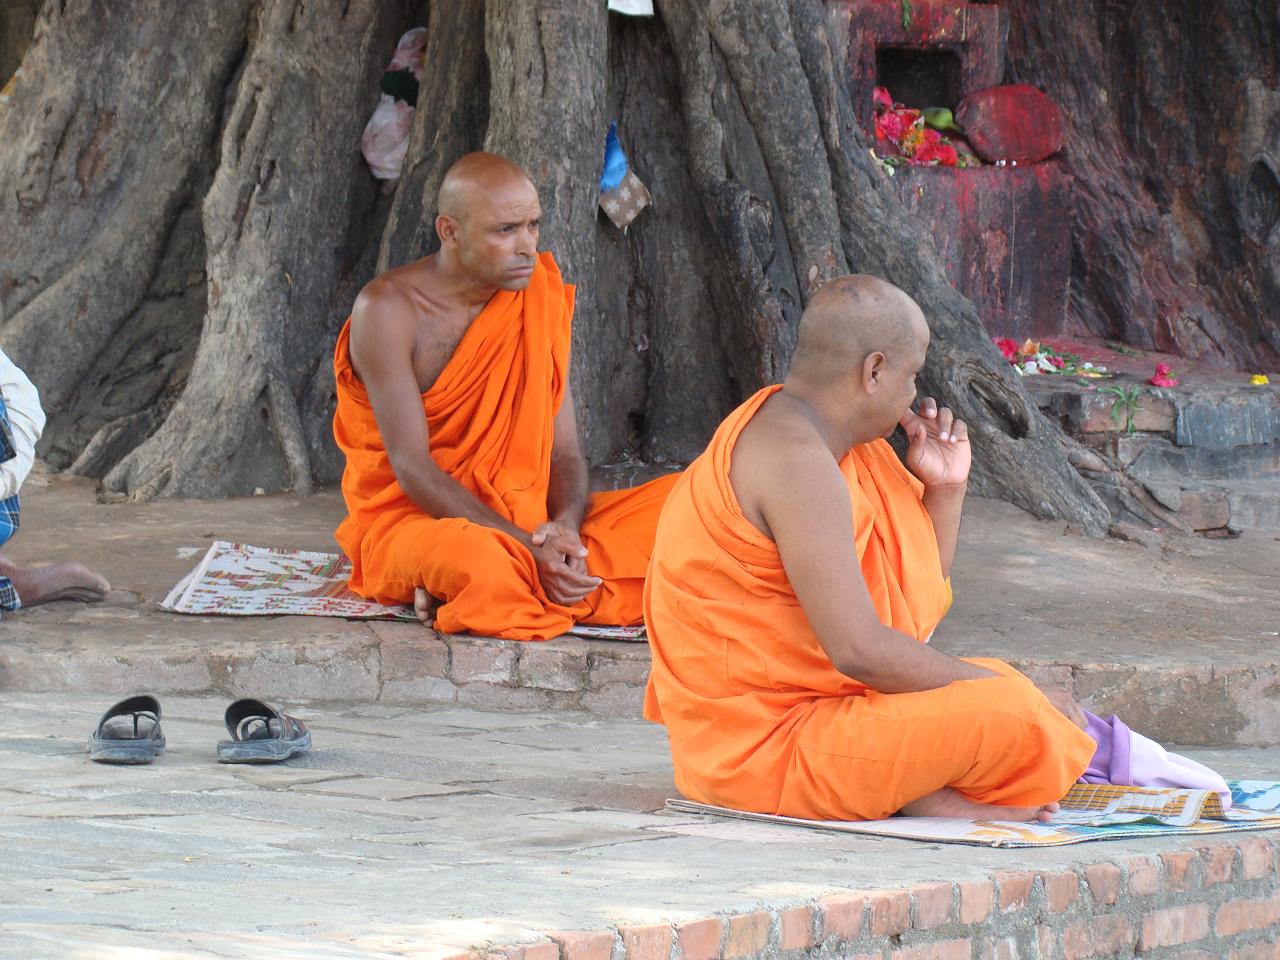 Buddhist monks in Lumbini (birthplace of Buddha, Nepal). The photo was taken from a distance with 8x optical zoom, so as not to distract the monks.